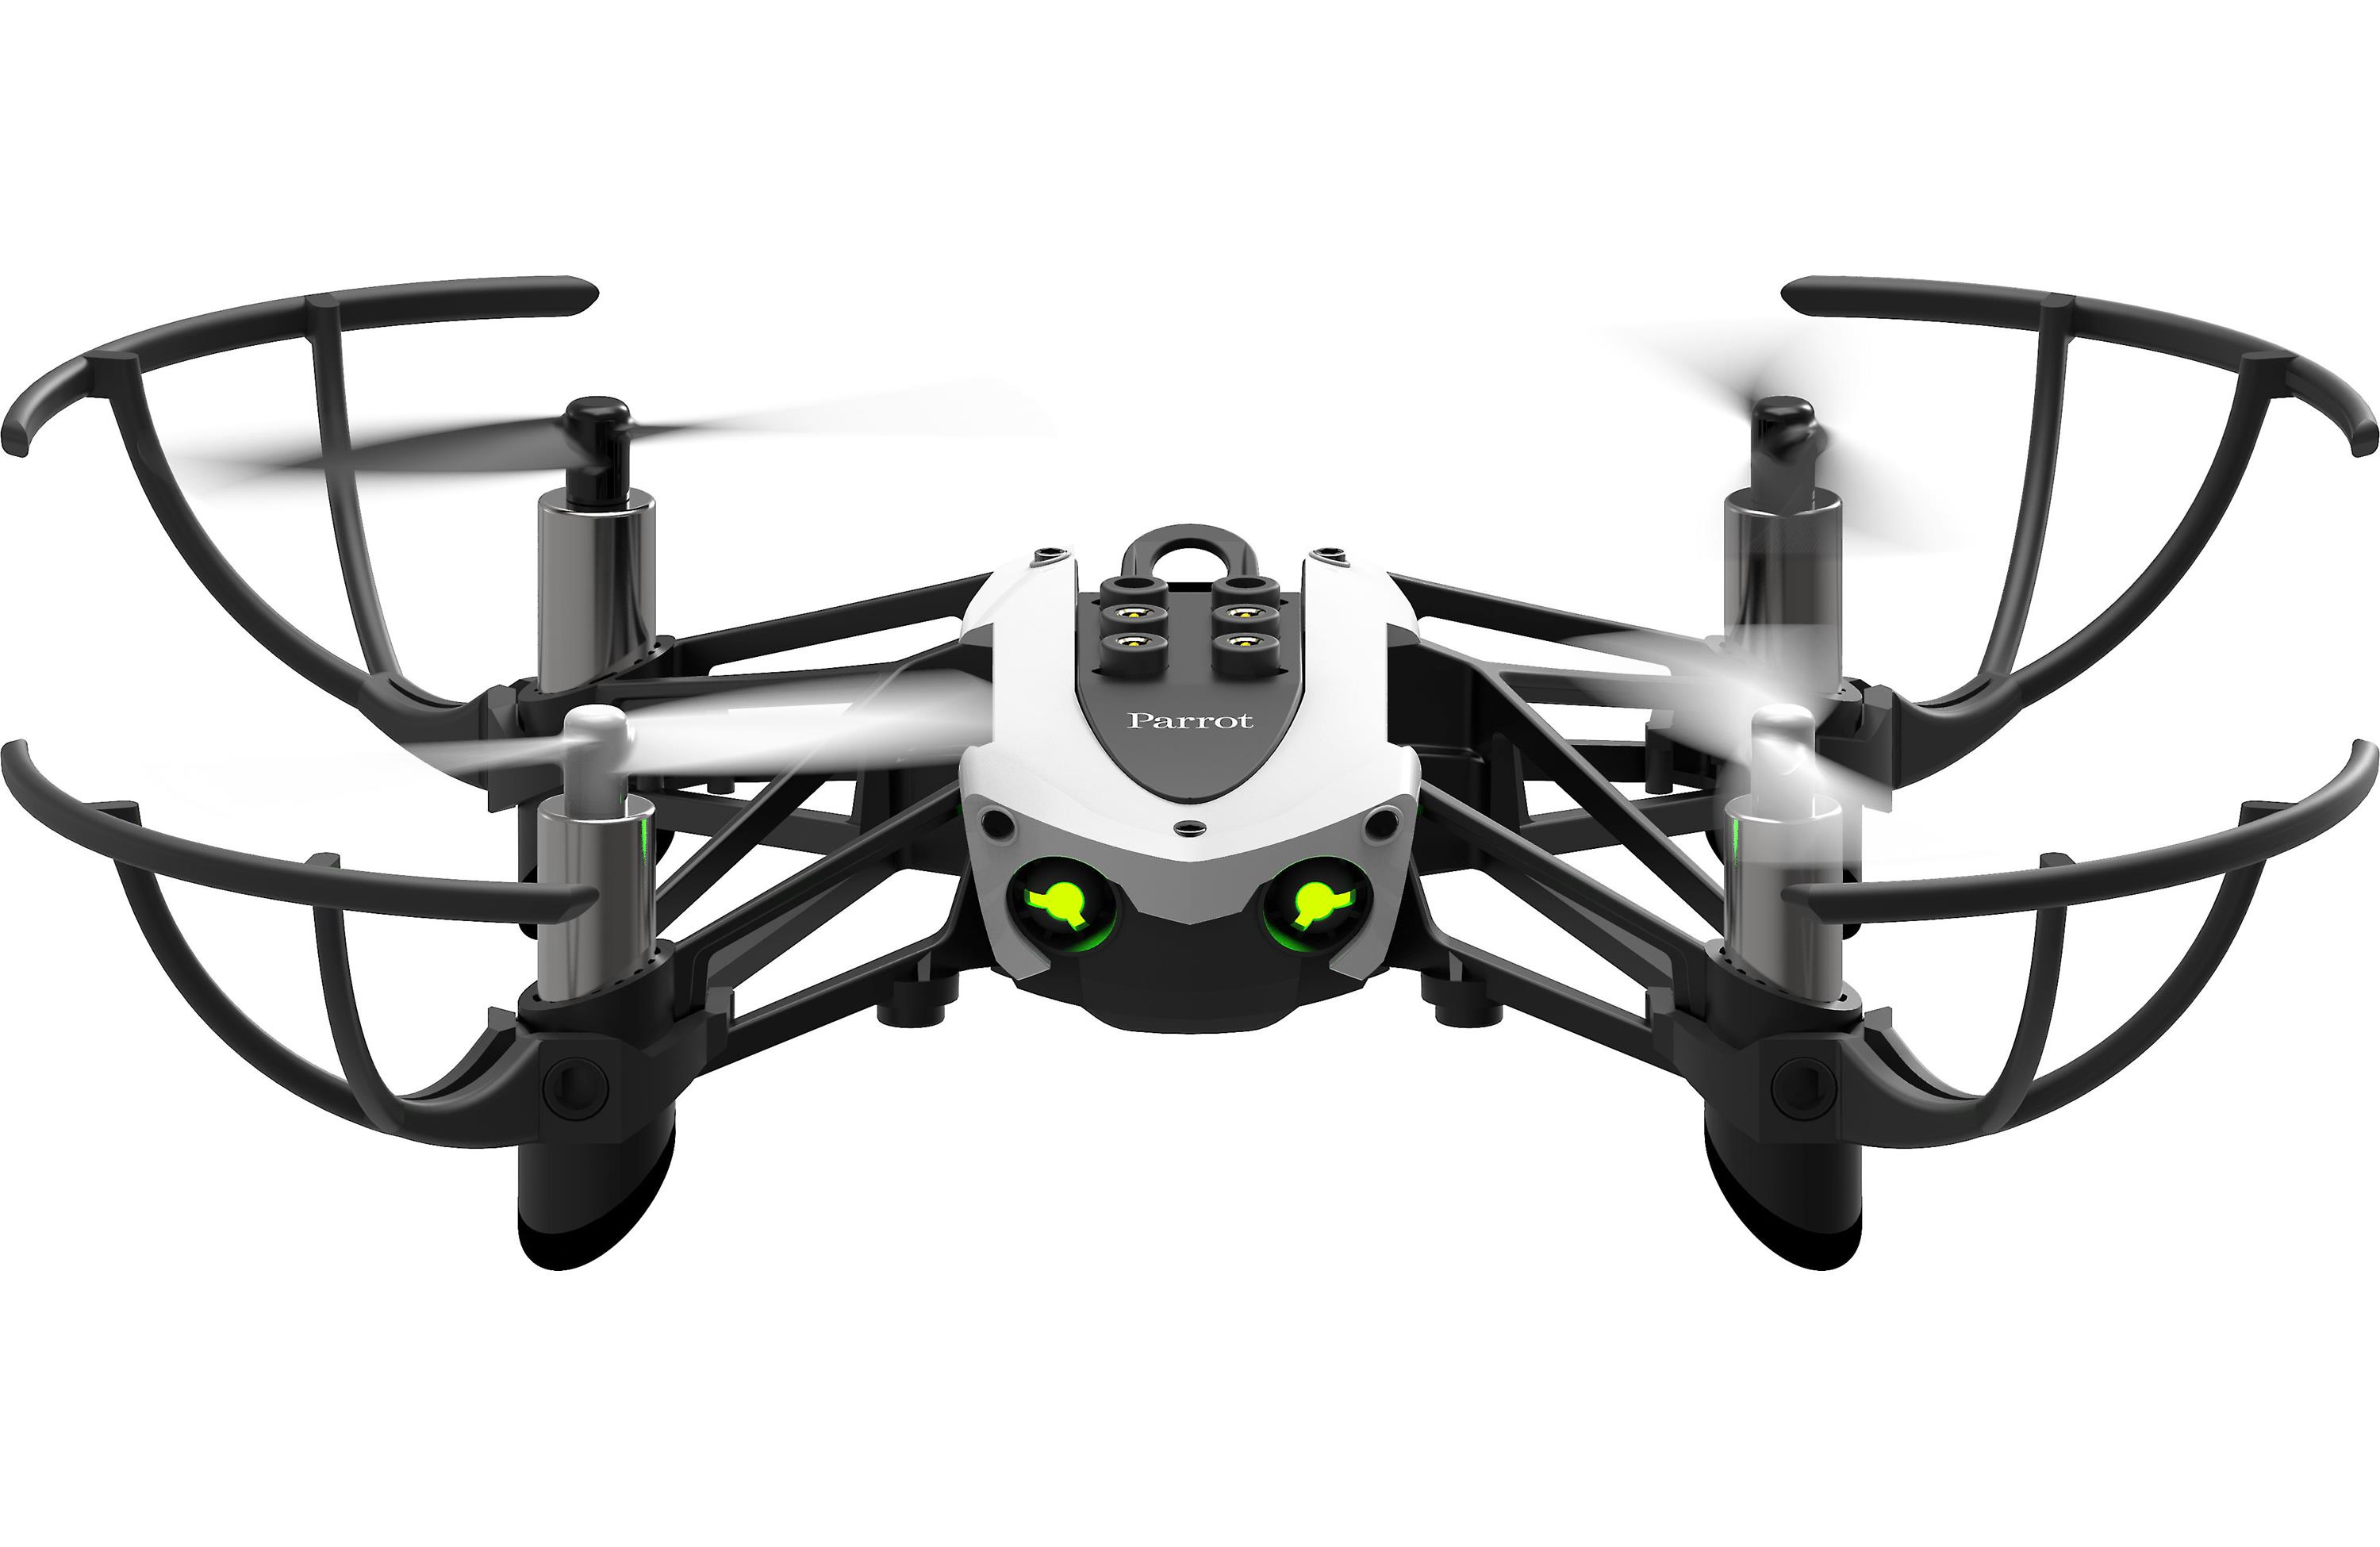 Are Parrot drones any good?